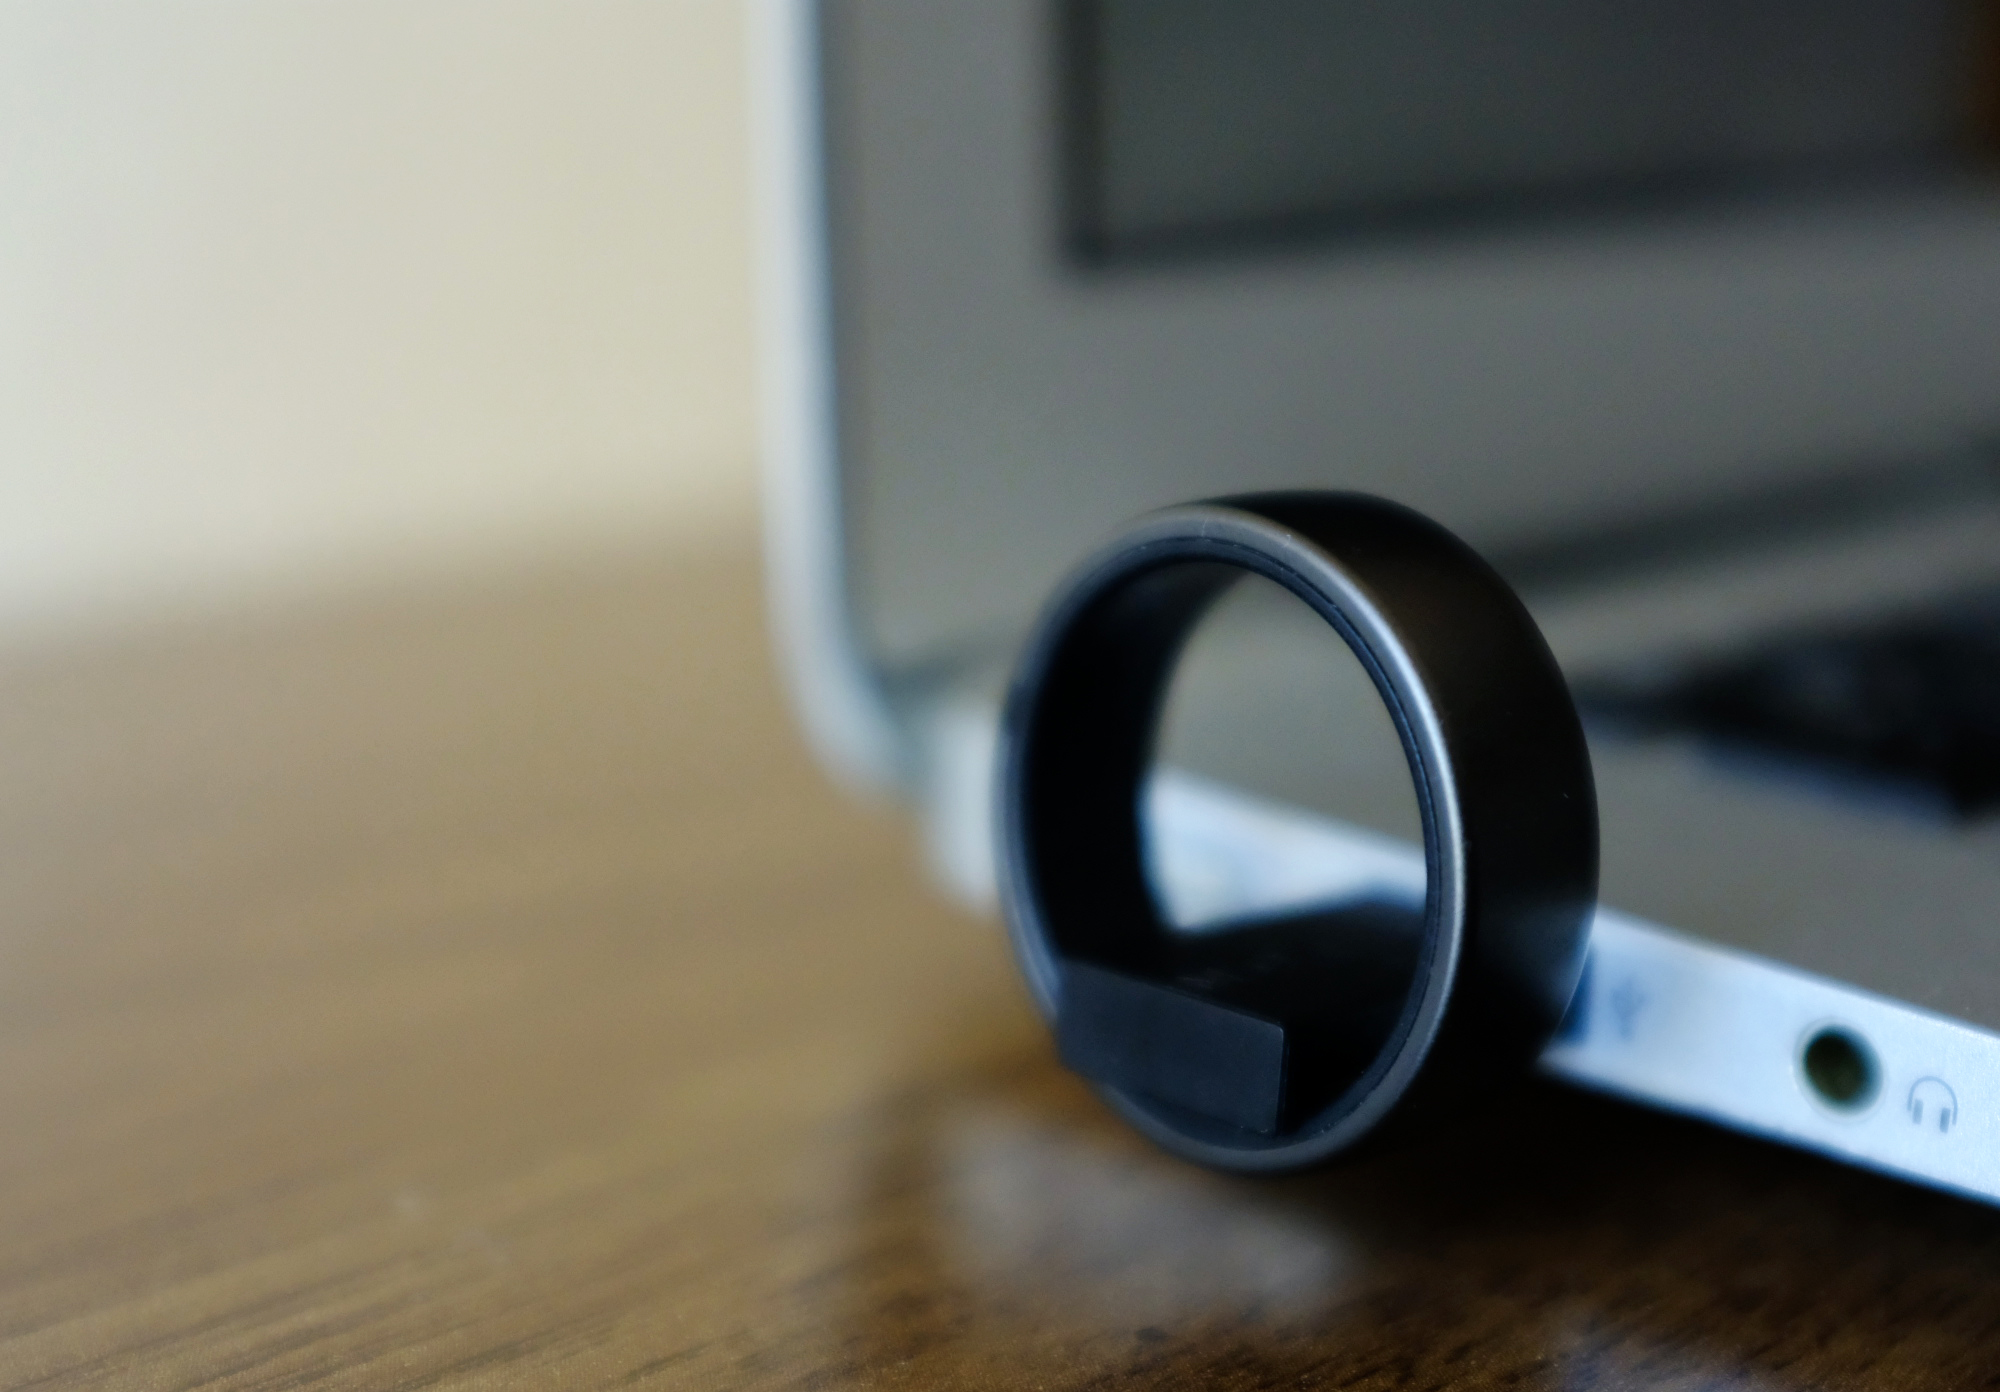 Motiv’s fitness ring is simple, but surprisingly capable